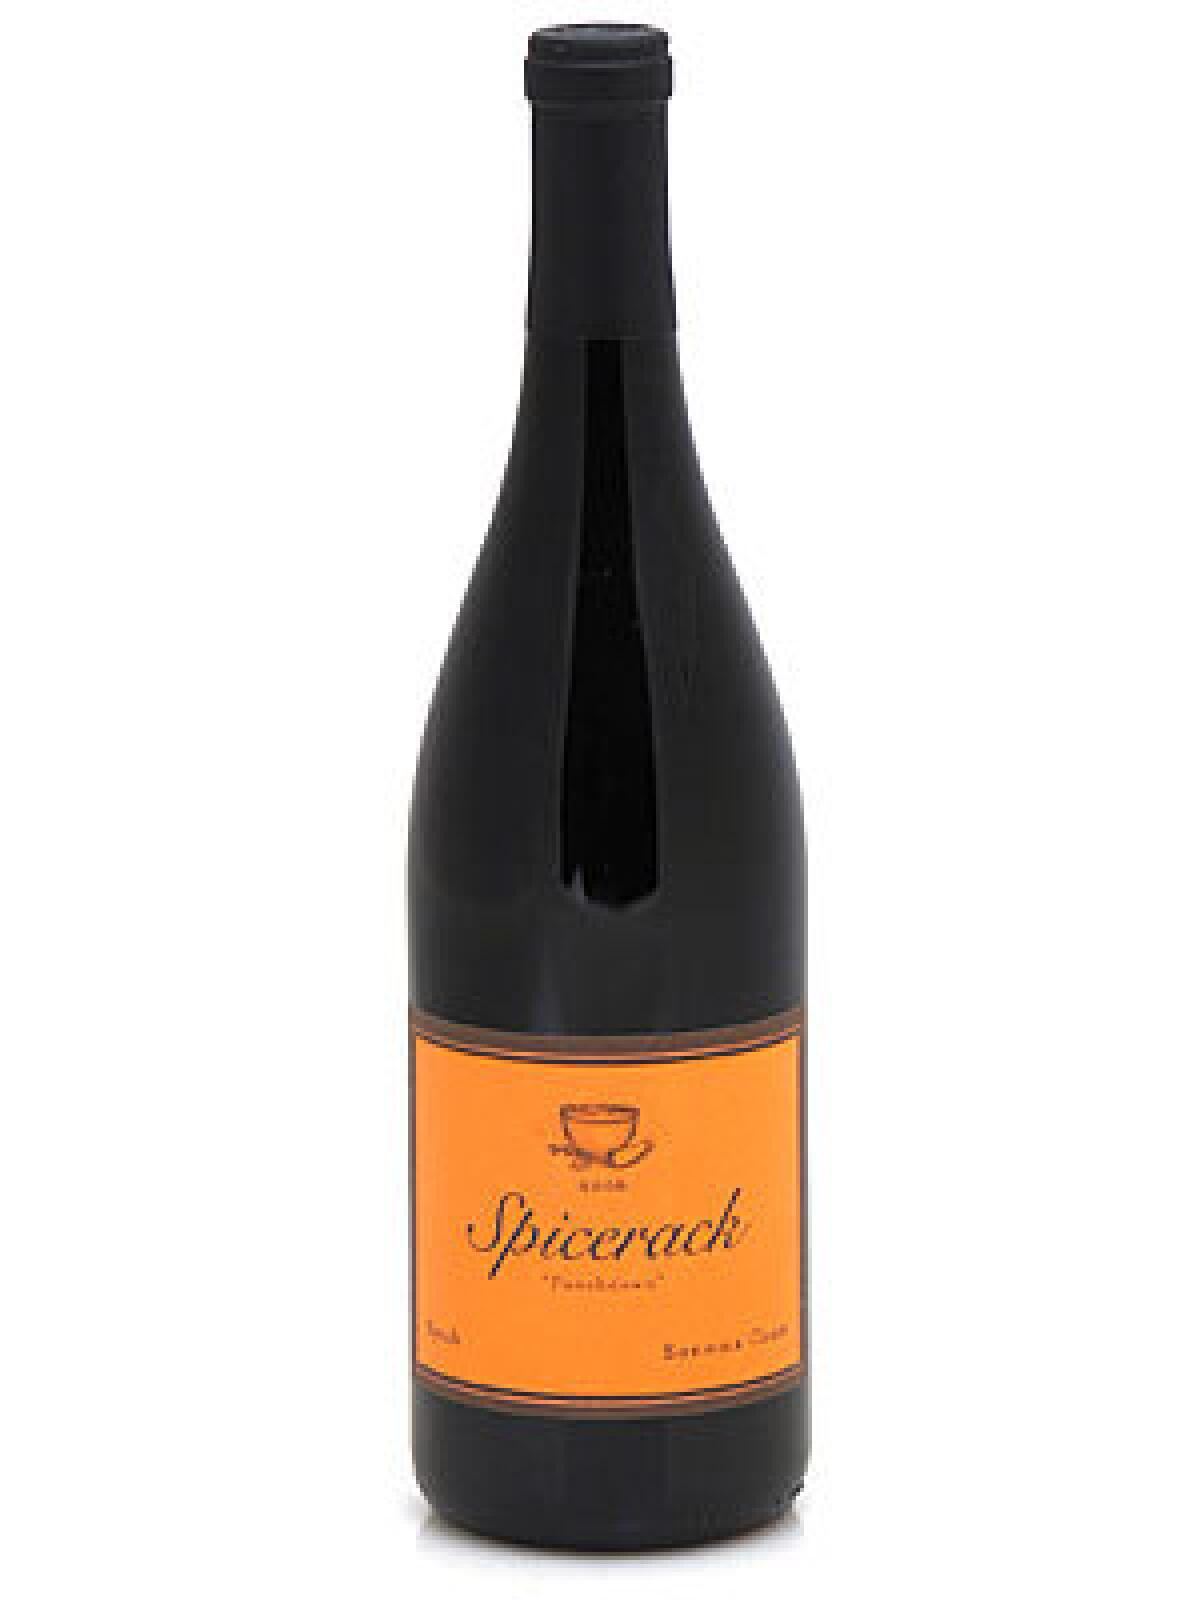 WINE OF THE WEEK: 2006 Spicerack "Punchdown" Syrah. Click here for details.